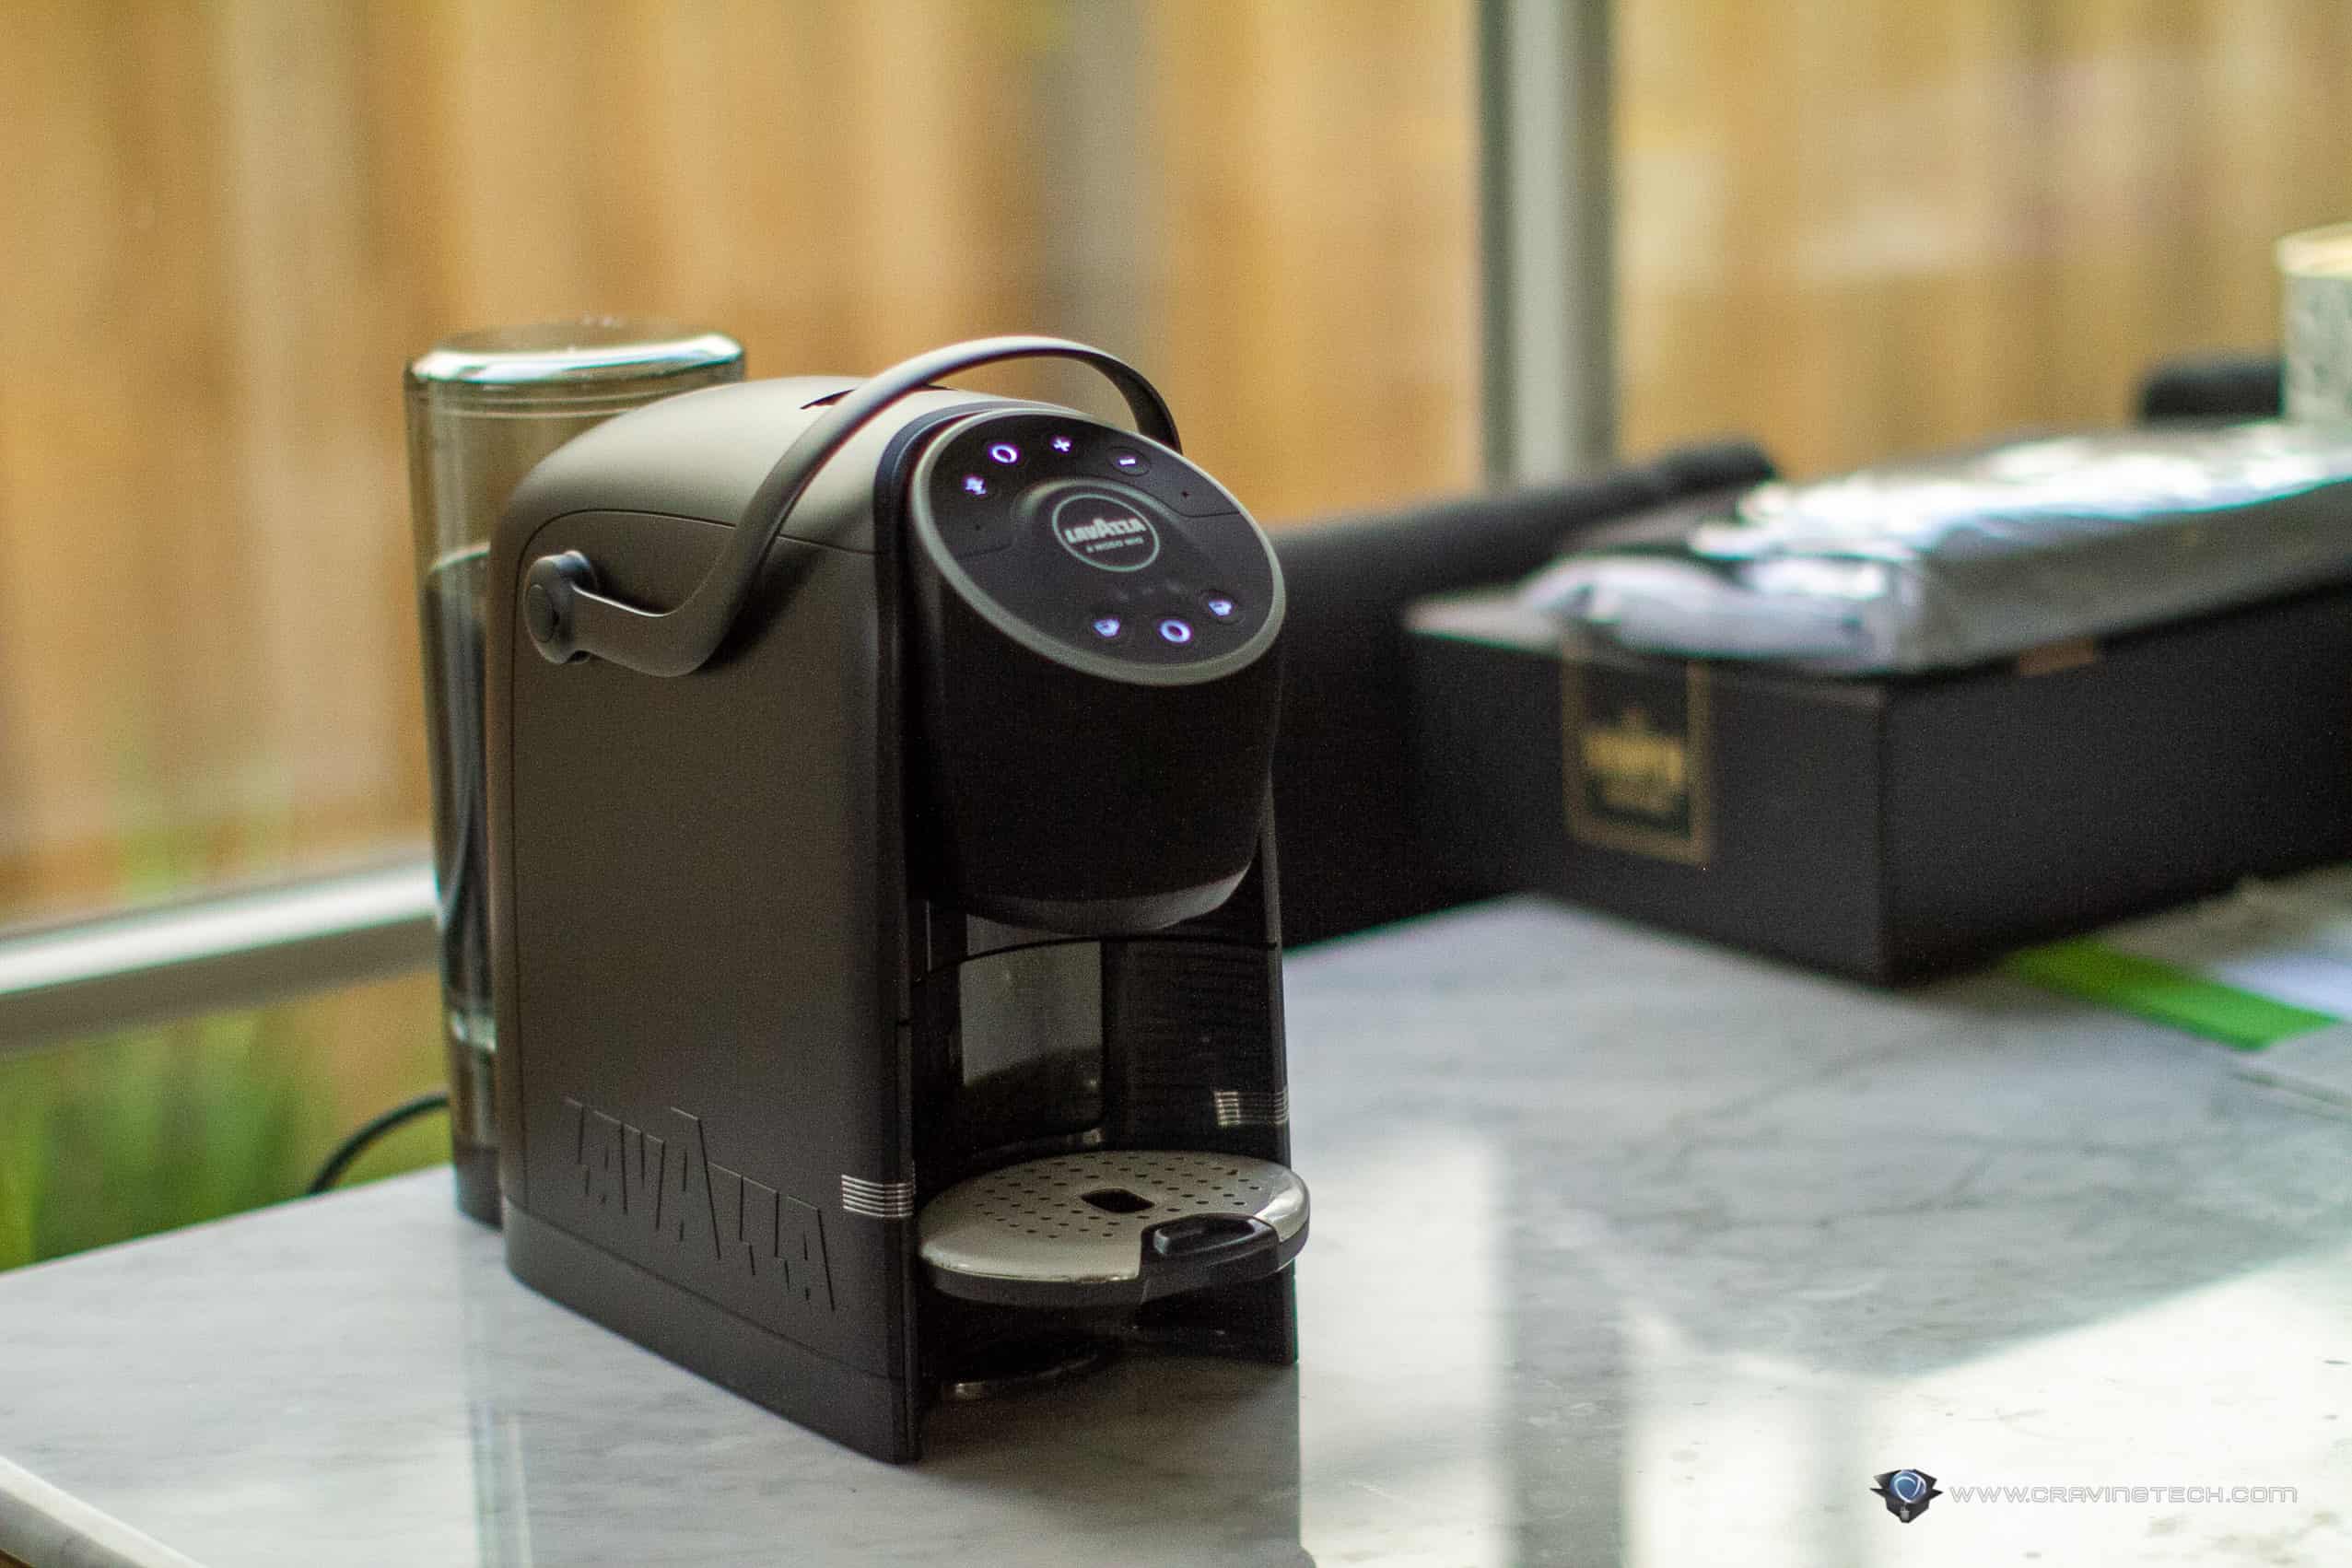 Pragmatic Pric Lavazza launches first coffee machine with built in